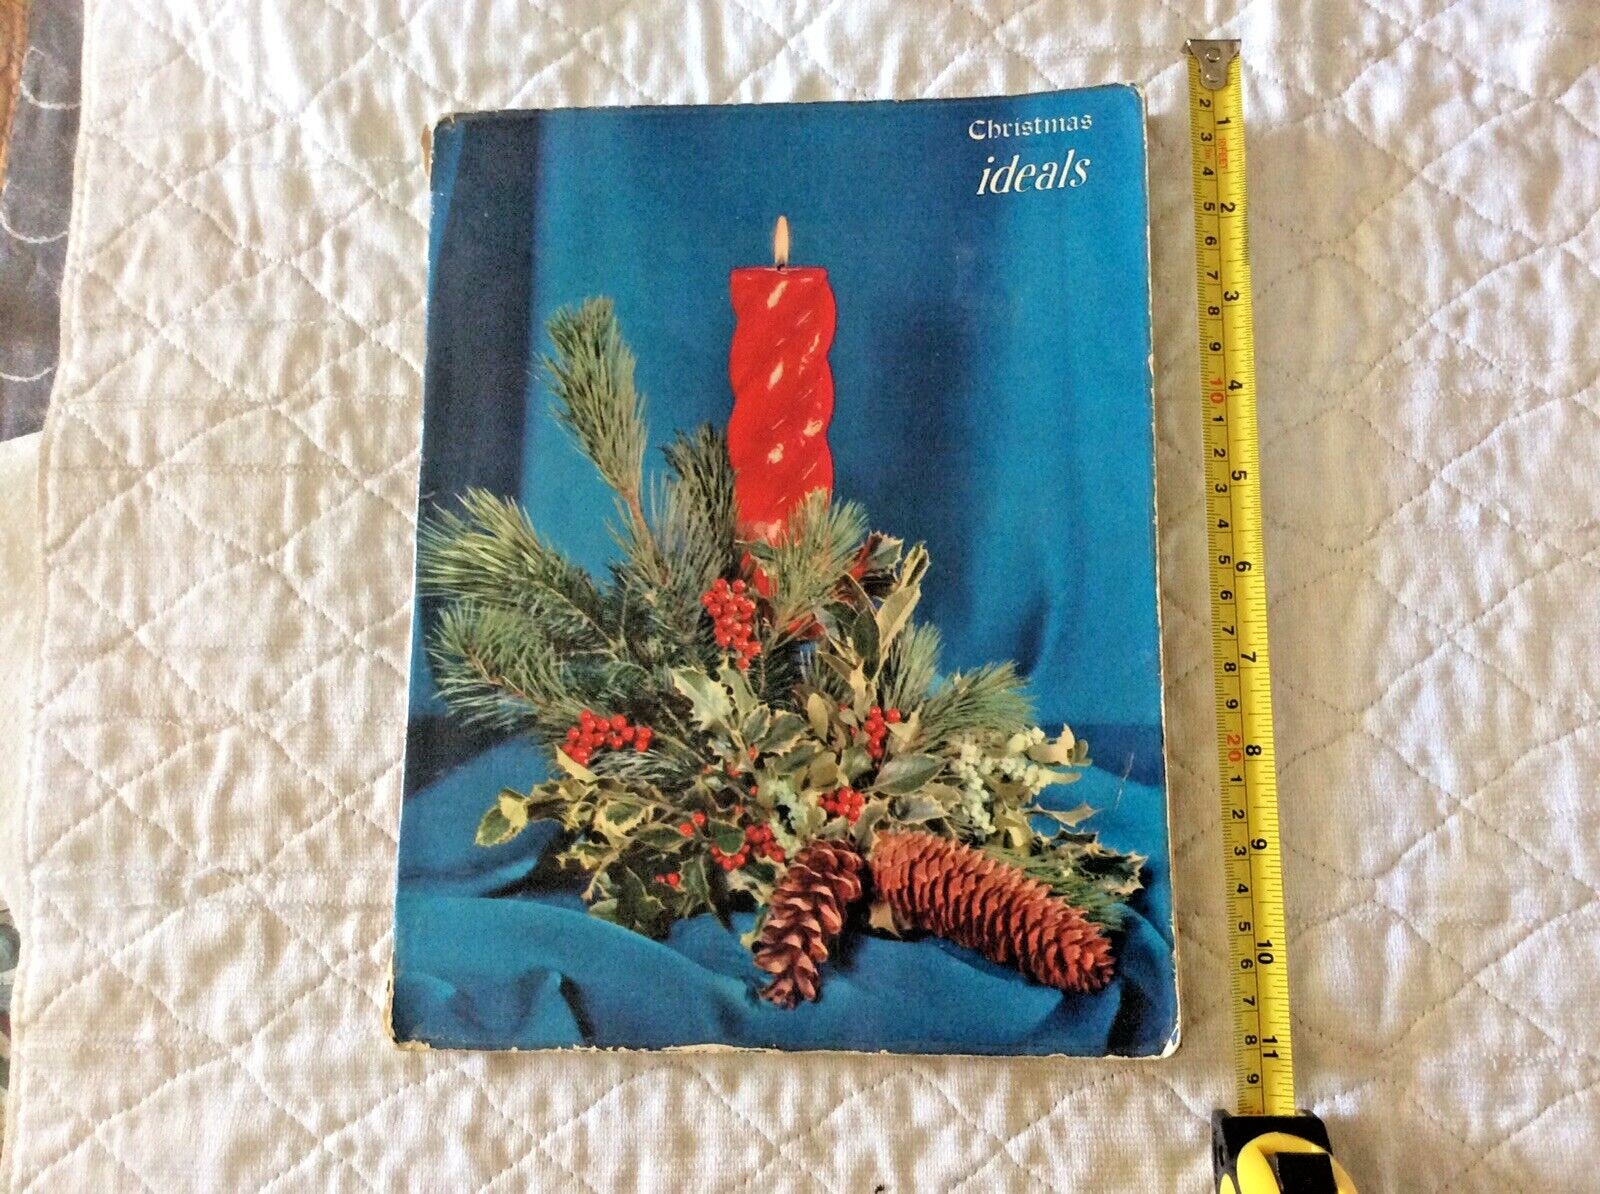 1955 Christmas “Ideals” Book. The Inside-Very Nice, Outer Cover Shows Age & Use